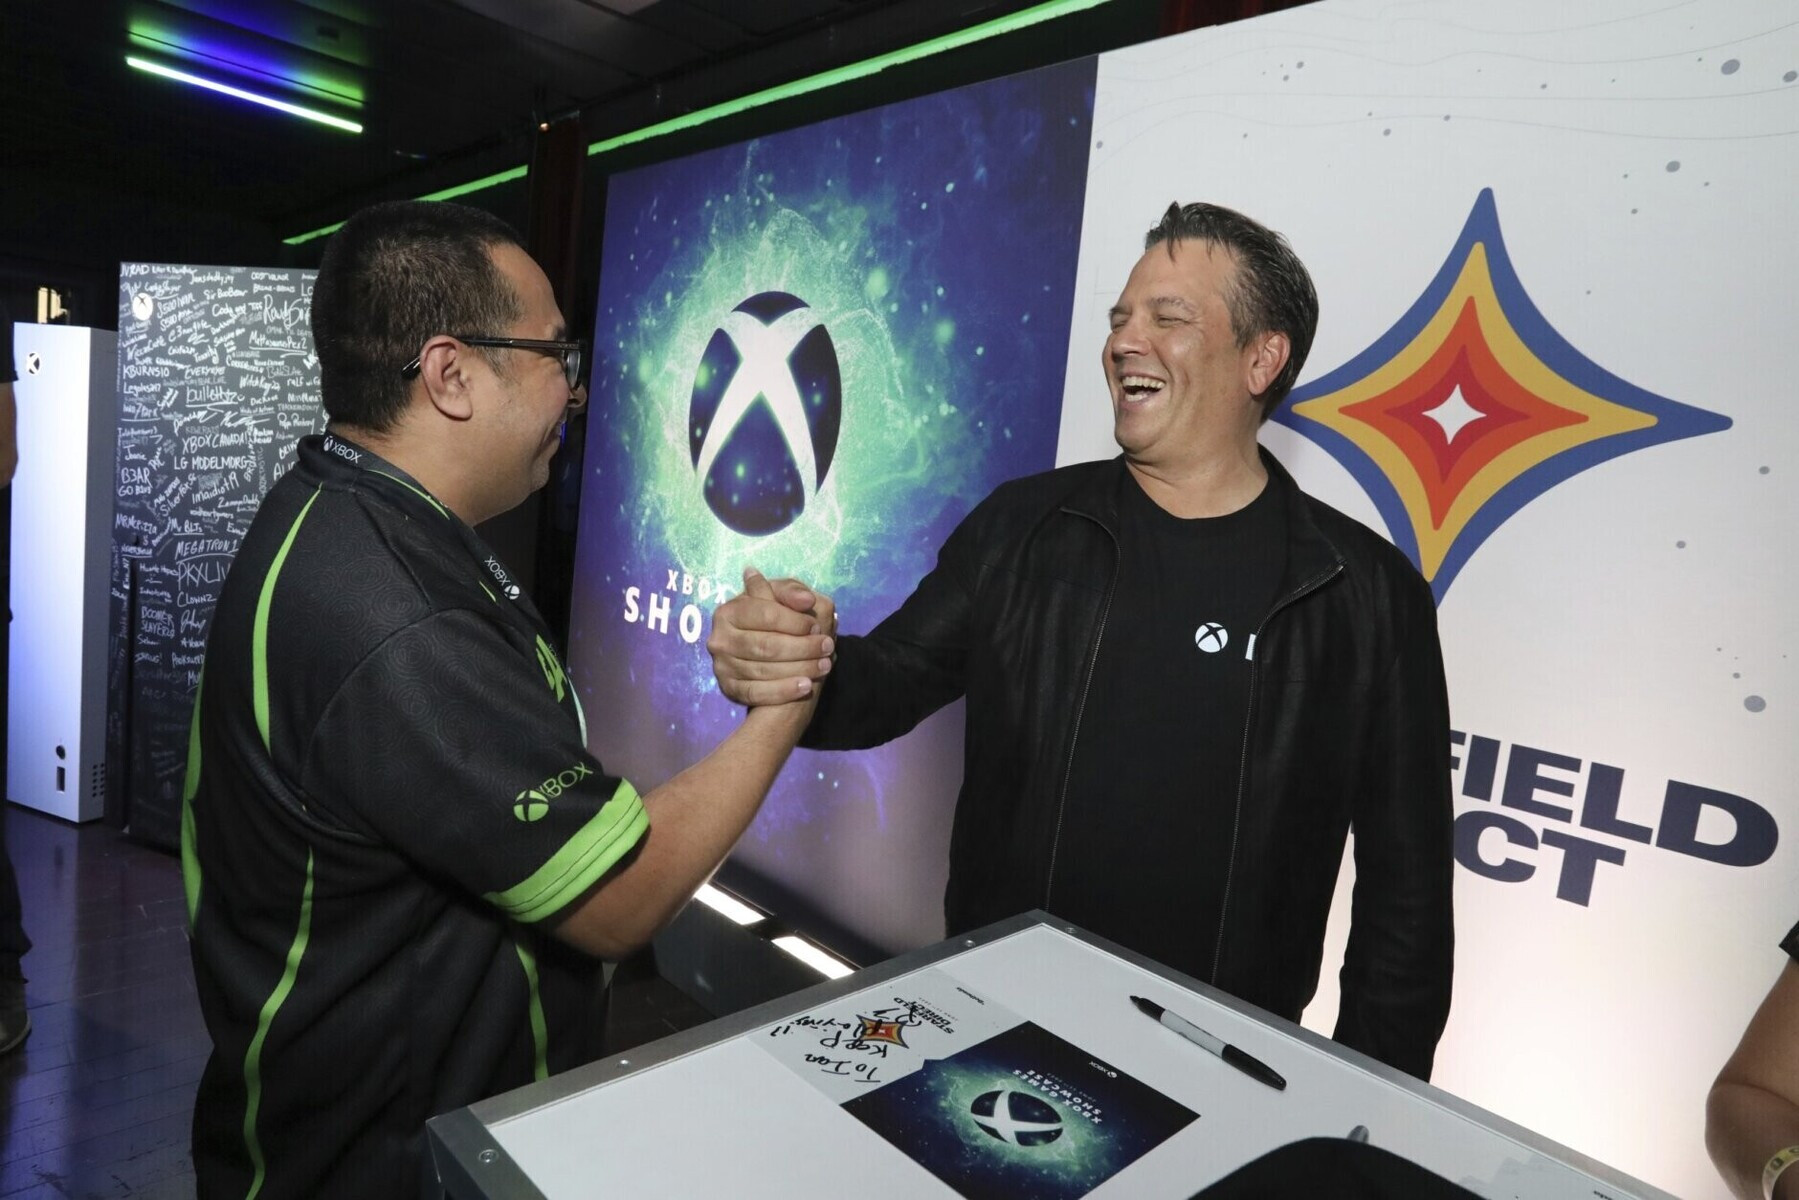 Phil Spencer Spent Nearly 23 Work Weeks Playing Xbox This Year